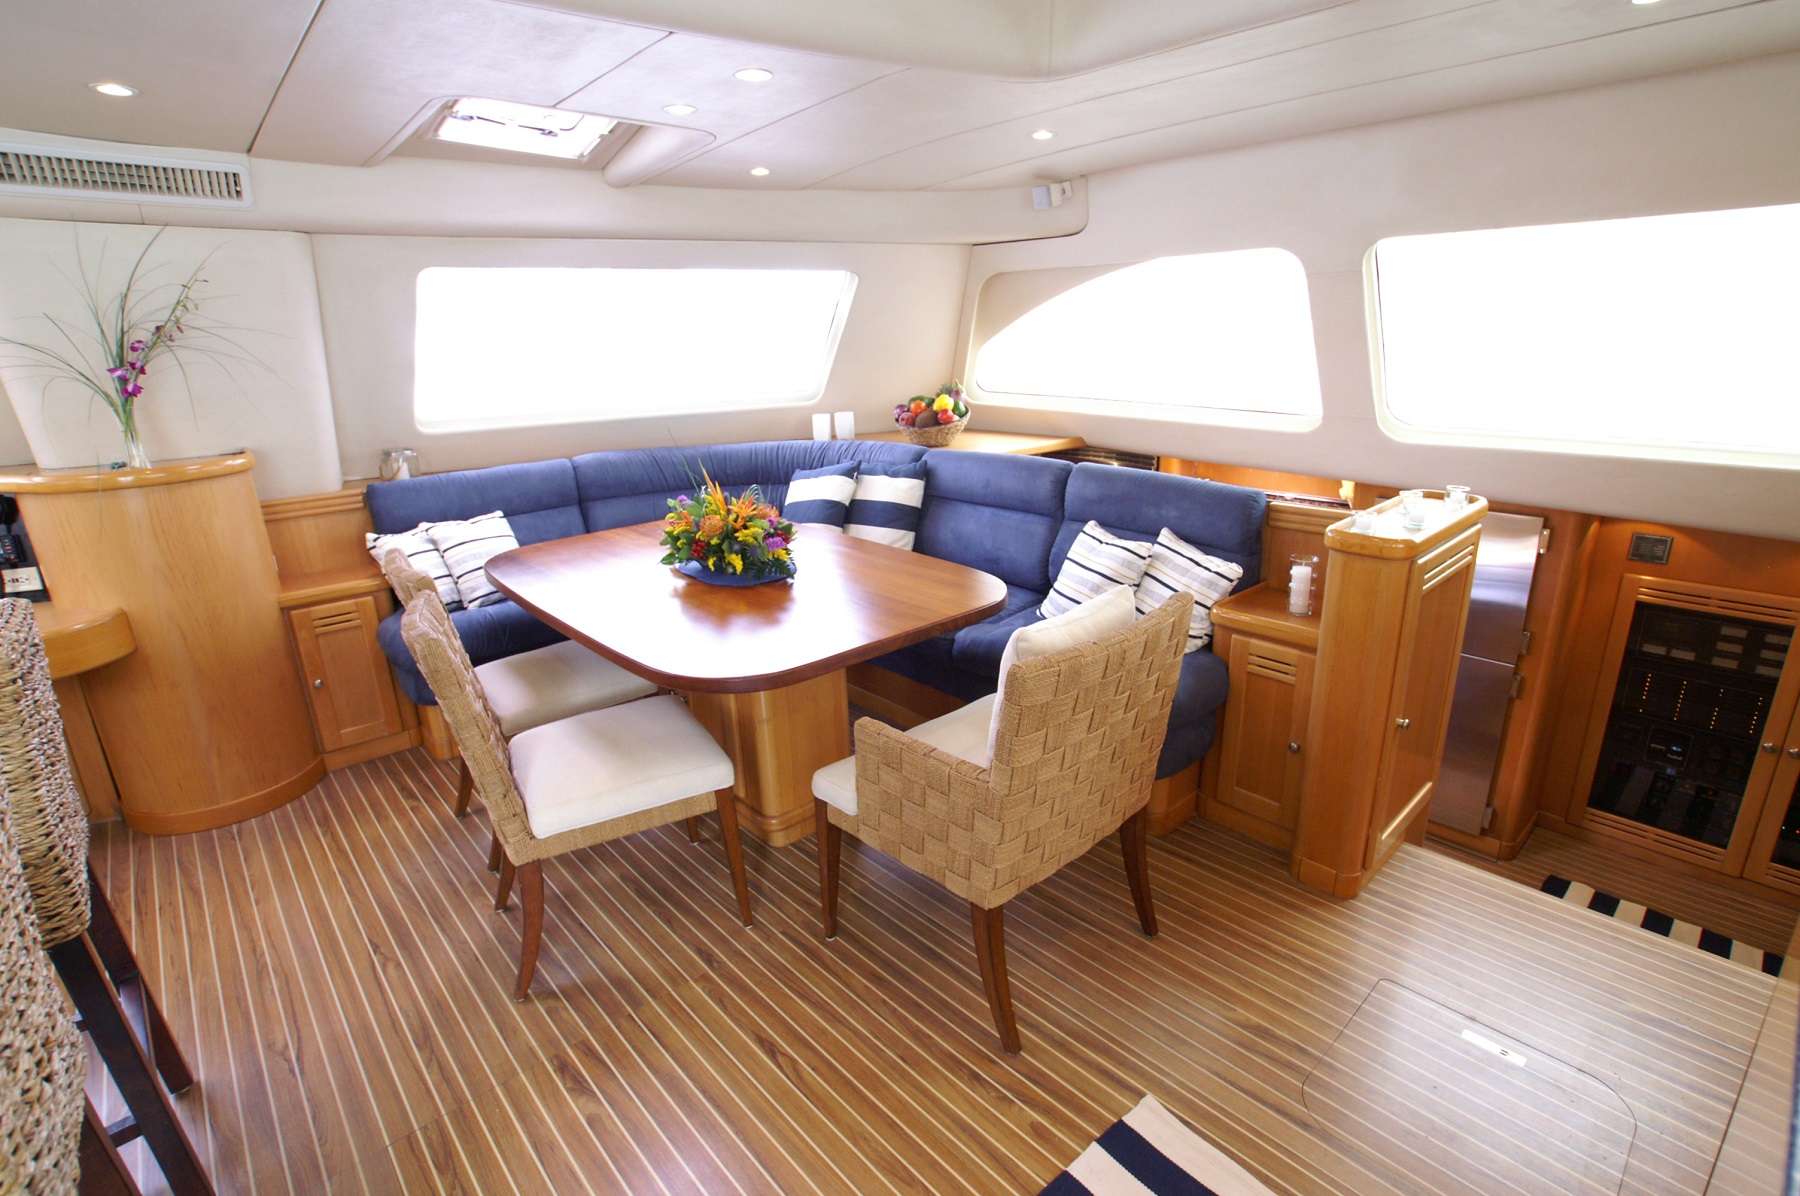 THE BIG DOG Yacht Charter - Interior dining